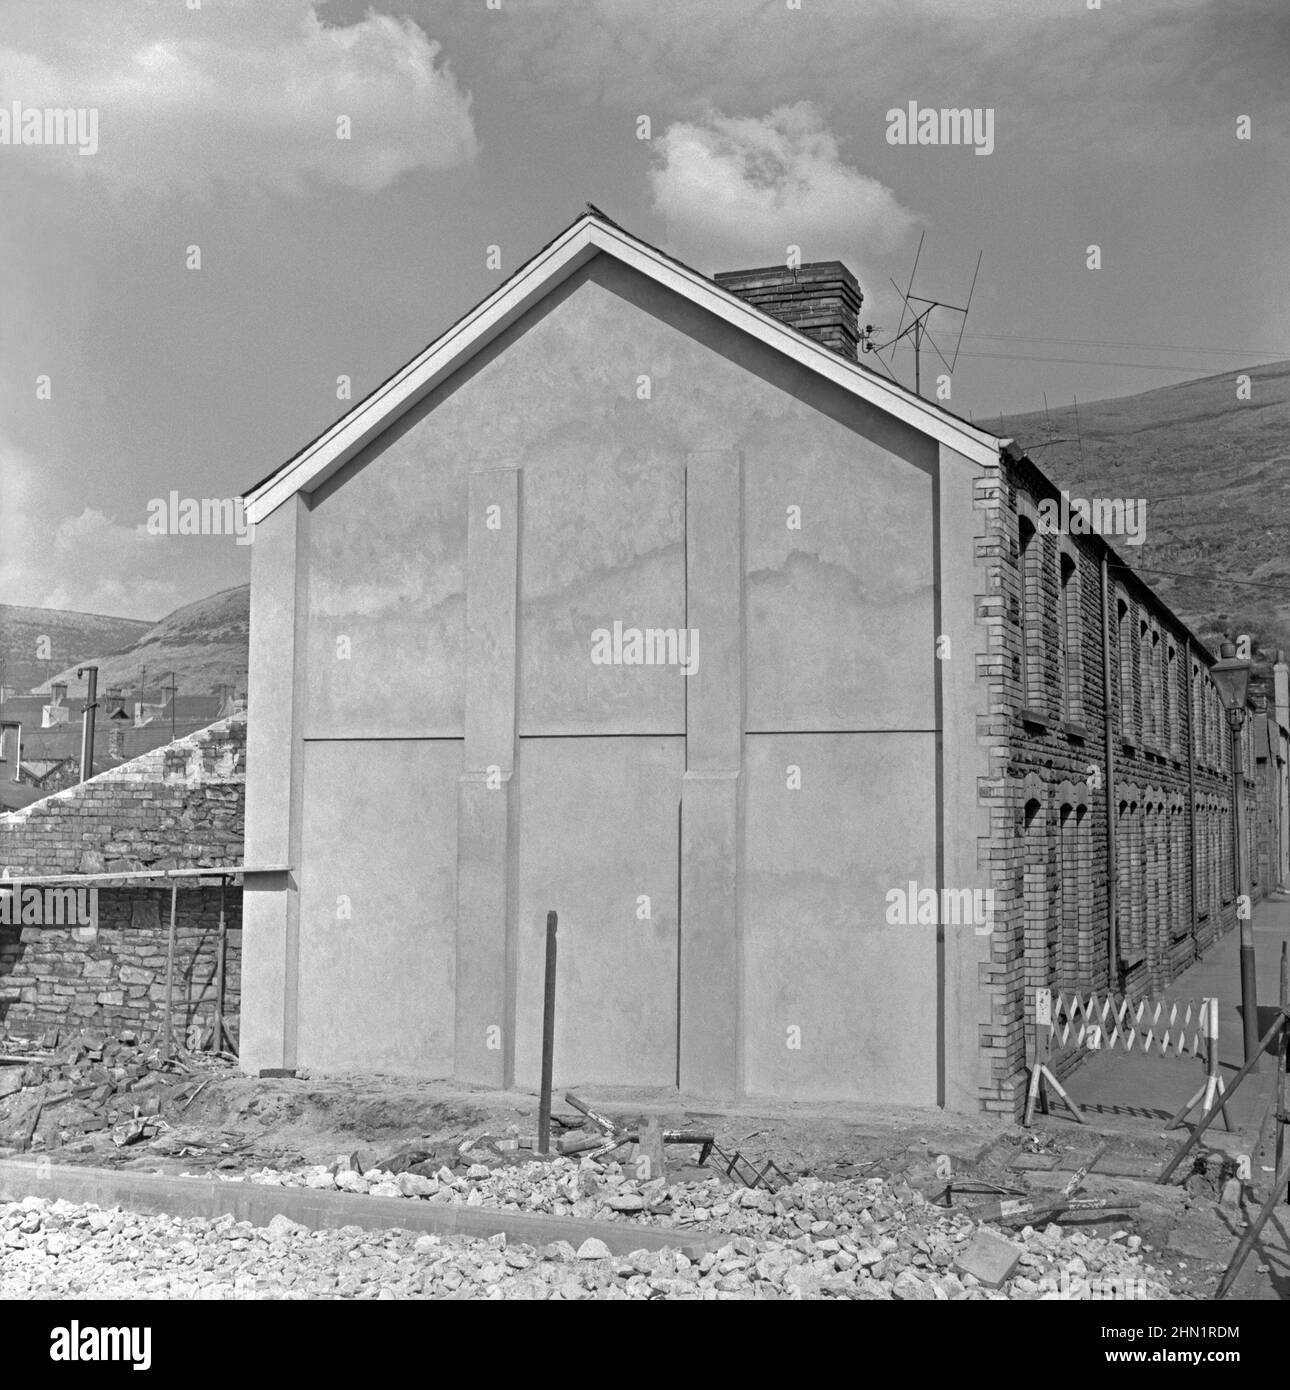 The building of Central Road (running left to right in the foreground), Port Talbot, West Glamorgan, Wales, UK in the late 1950s – here the new road had required the demolition of terraced houses. A new concrete end wall (or gable end with buttressing) was added to 16 Penrhyn Street. Central Road was one of the main access routes to the steelworks. Eventually the main route to the works was via Cefn Gwrgan Road. However, both these access roads were cut by the building of Harbour Way bypass in 2013 – a vintage 1950s/60s photograph. Stock Photo